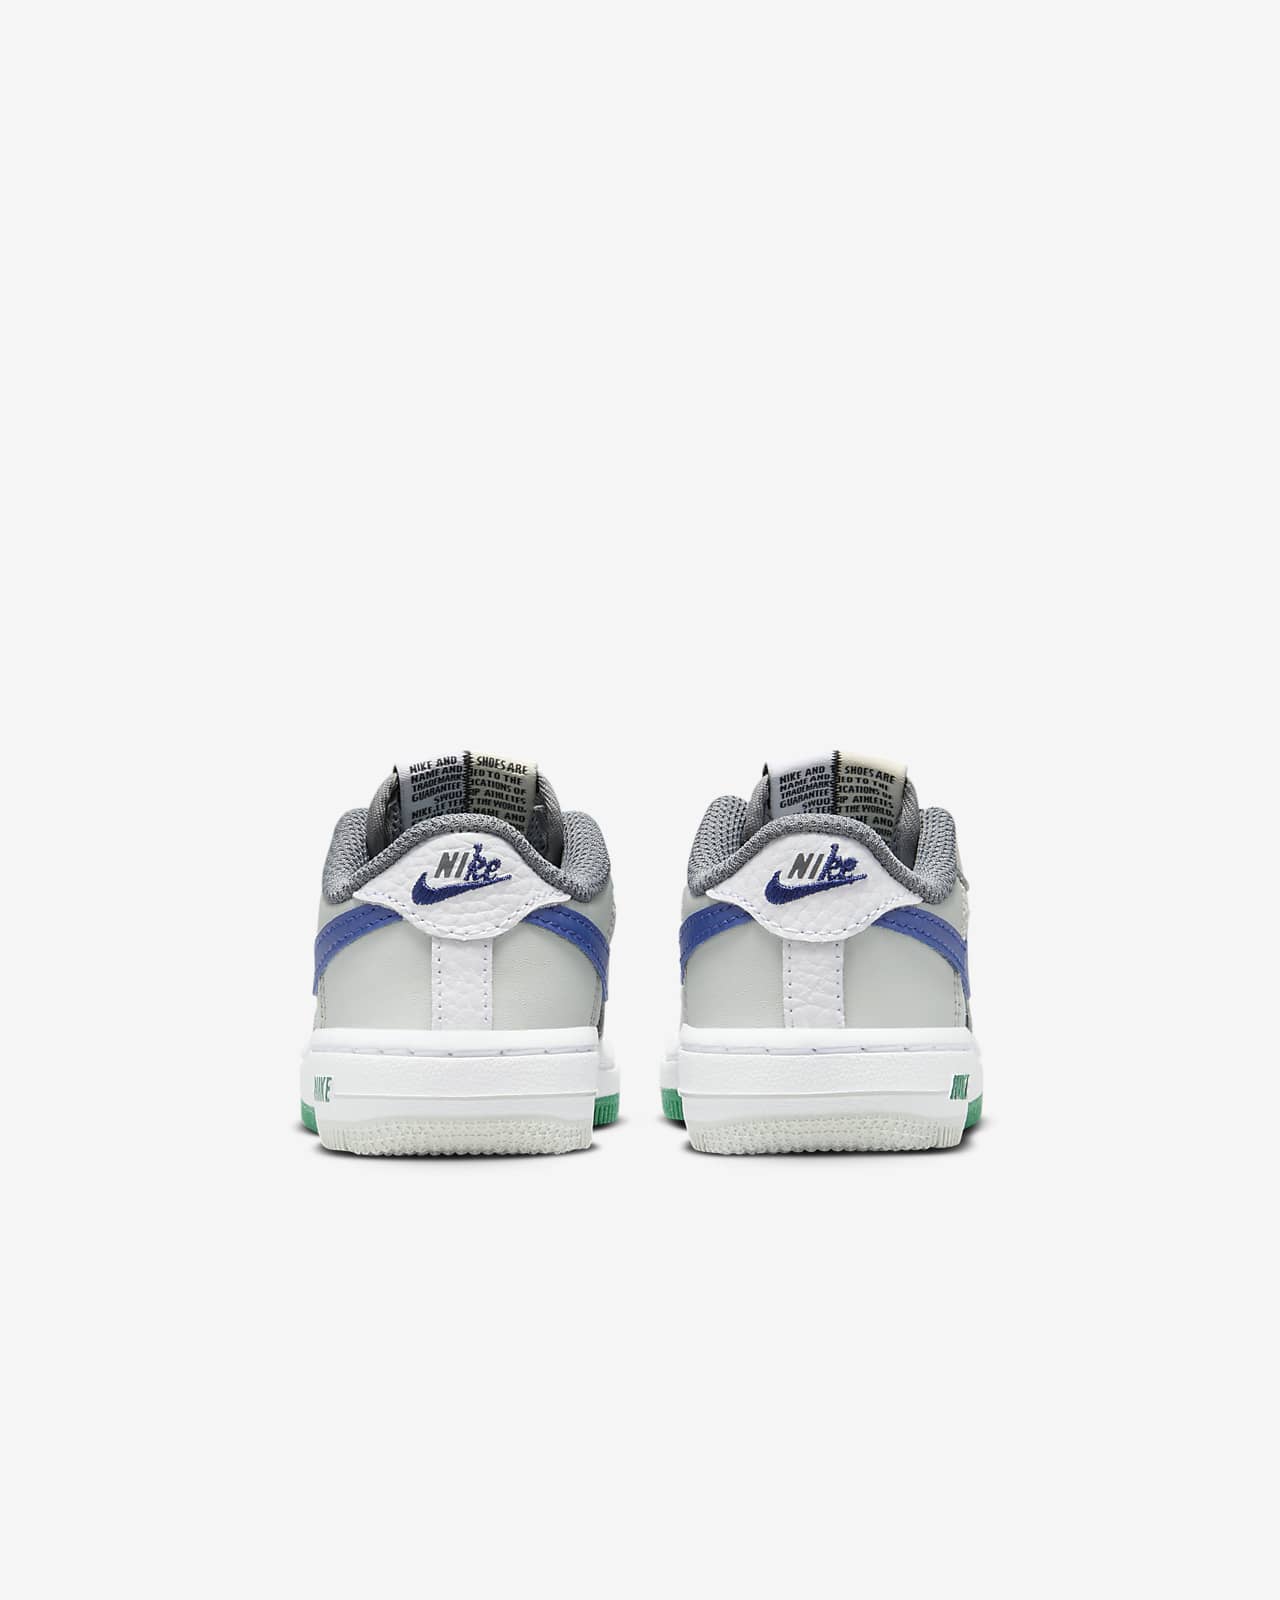 Nike Force 1 LV8 3 Baby/Toddler Shoes.